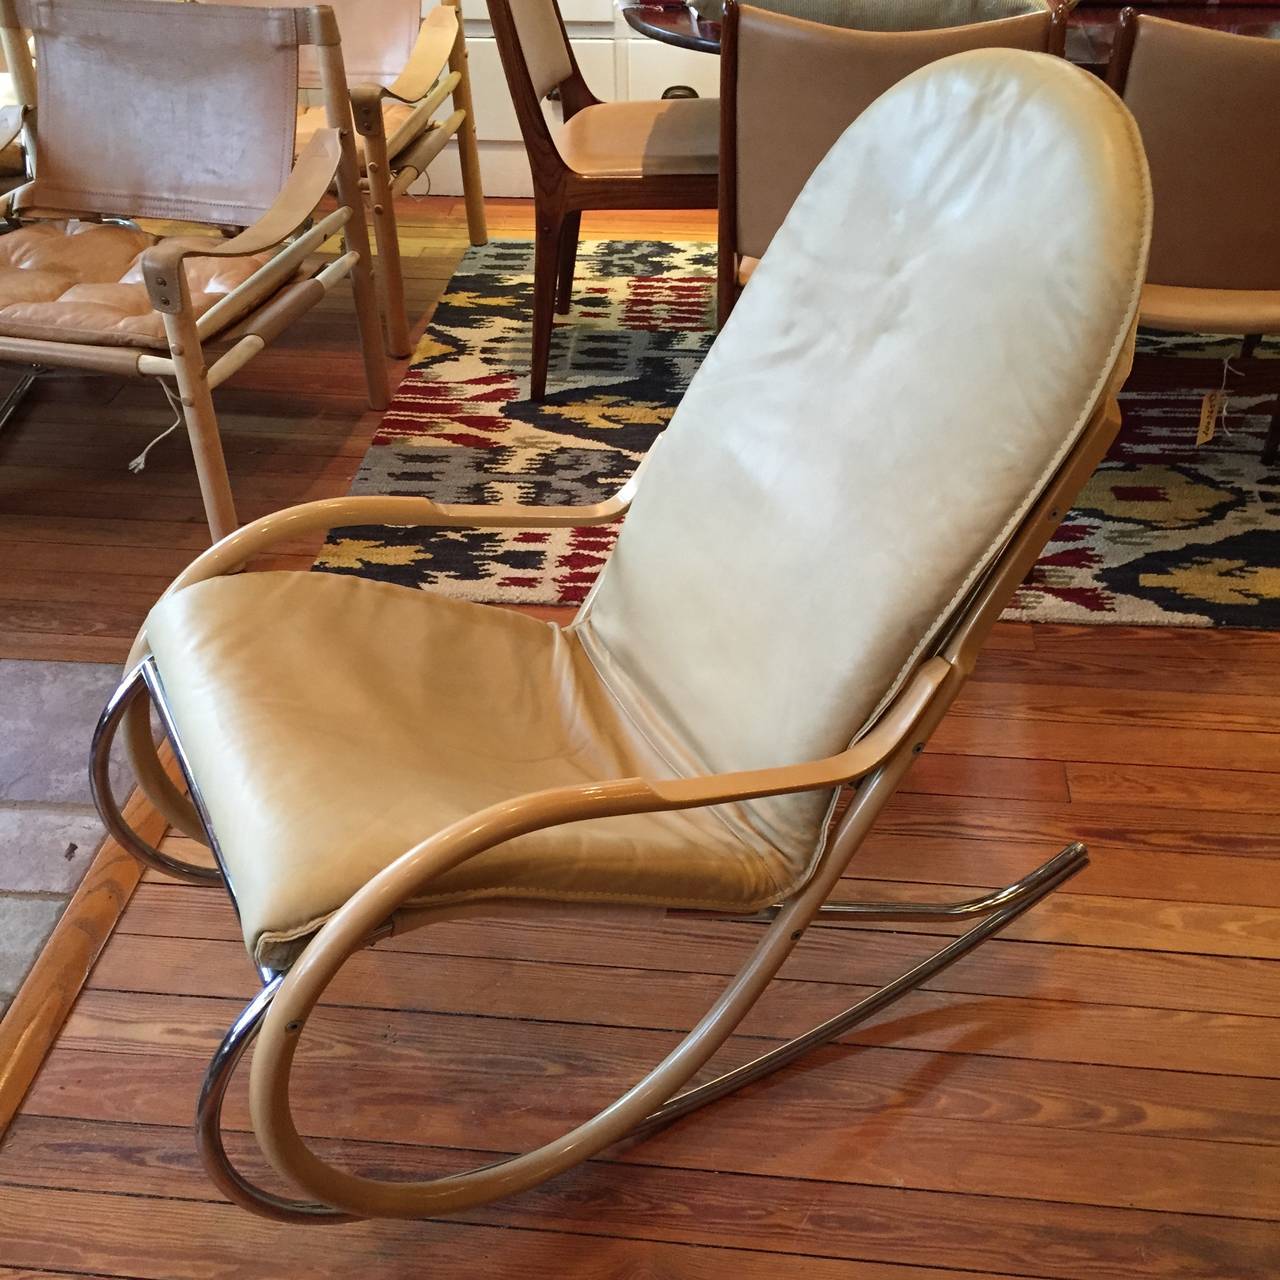 Classic 1970s Paul Tuttle Nonna rocking chair. Frame of chrome-plated tubular steel and bent beech wood. Upholstery of cream leather over strap support of natural canvas.